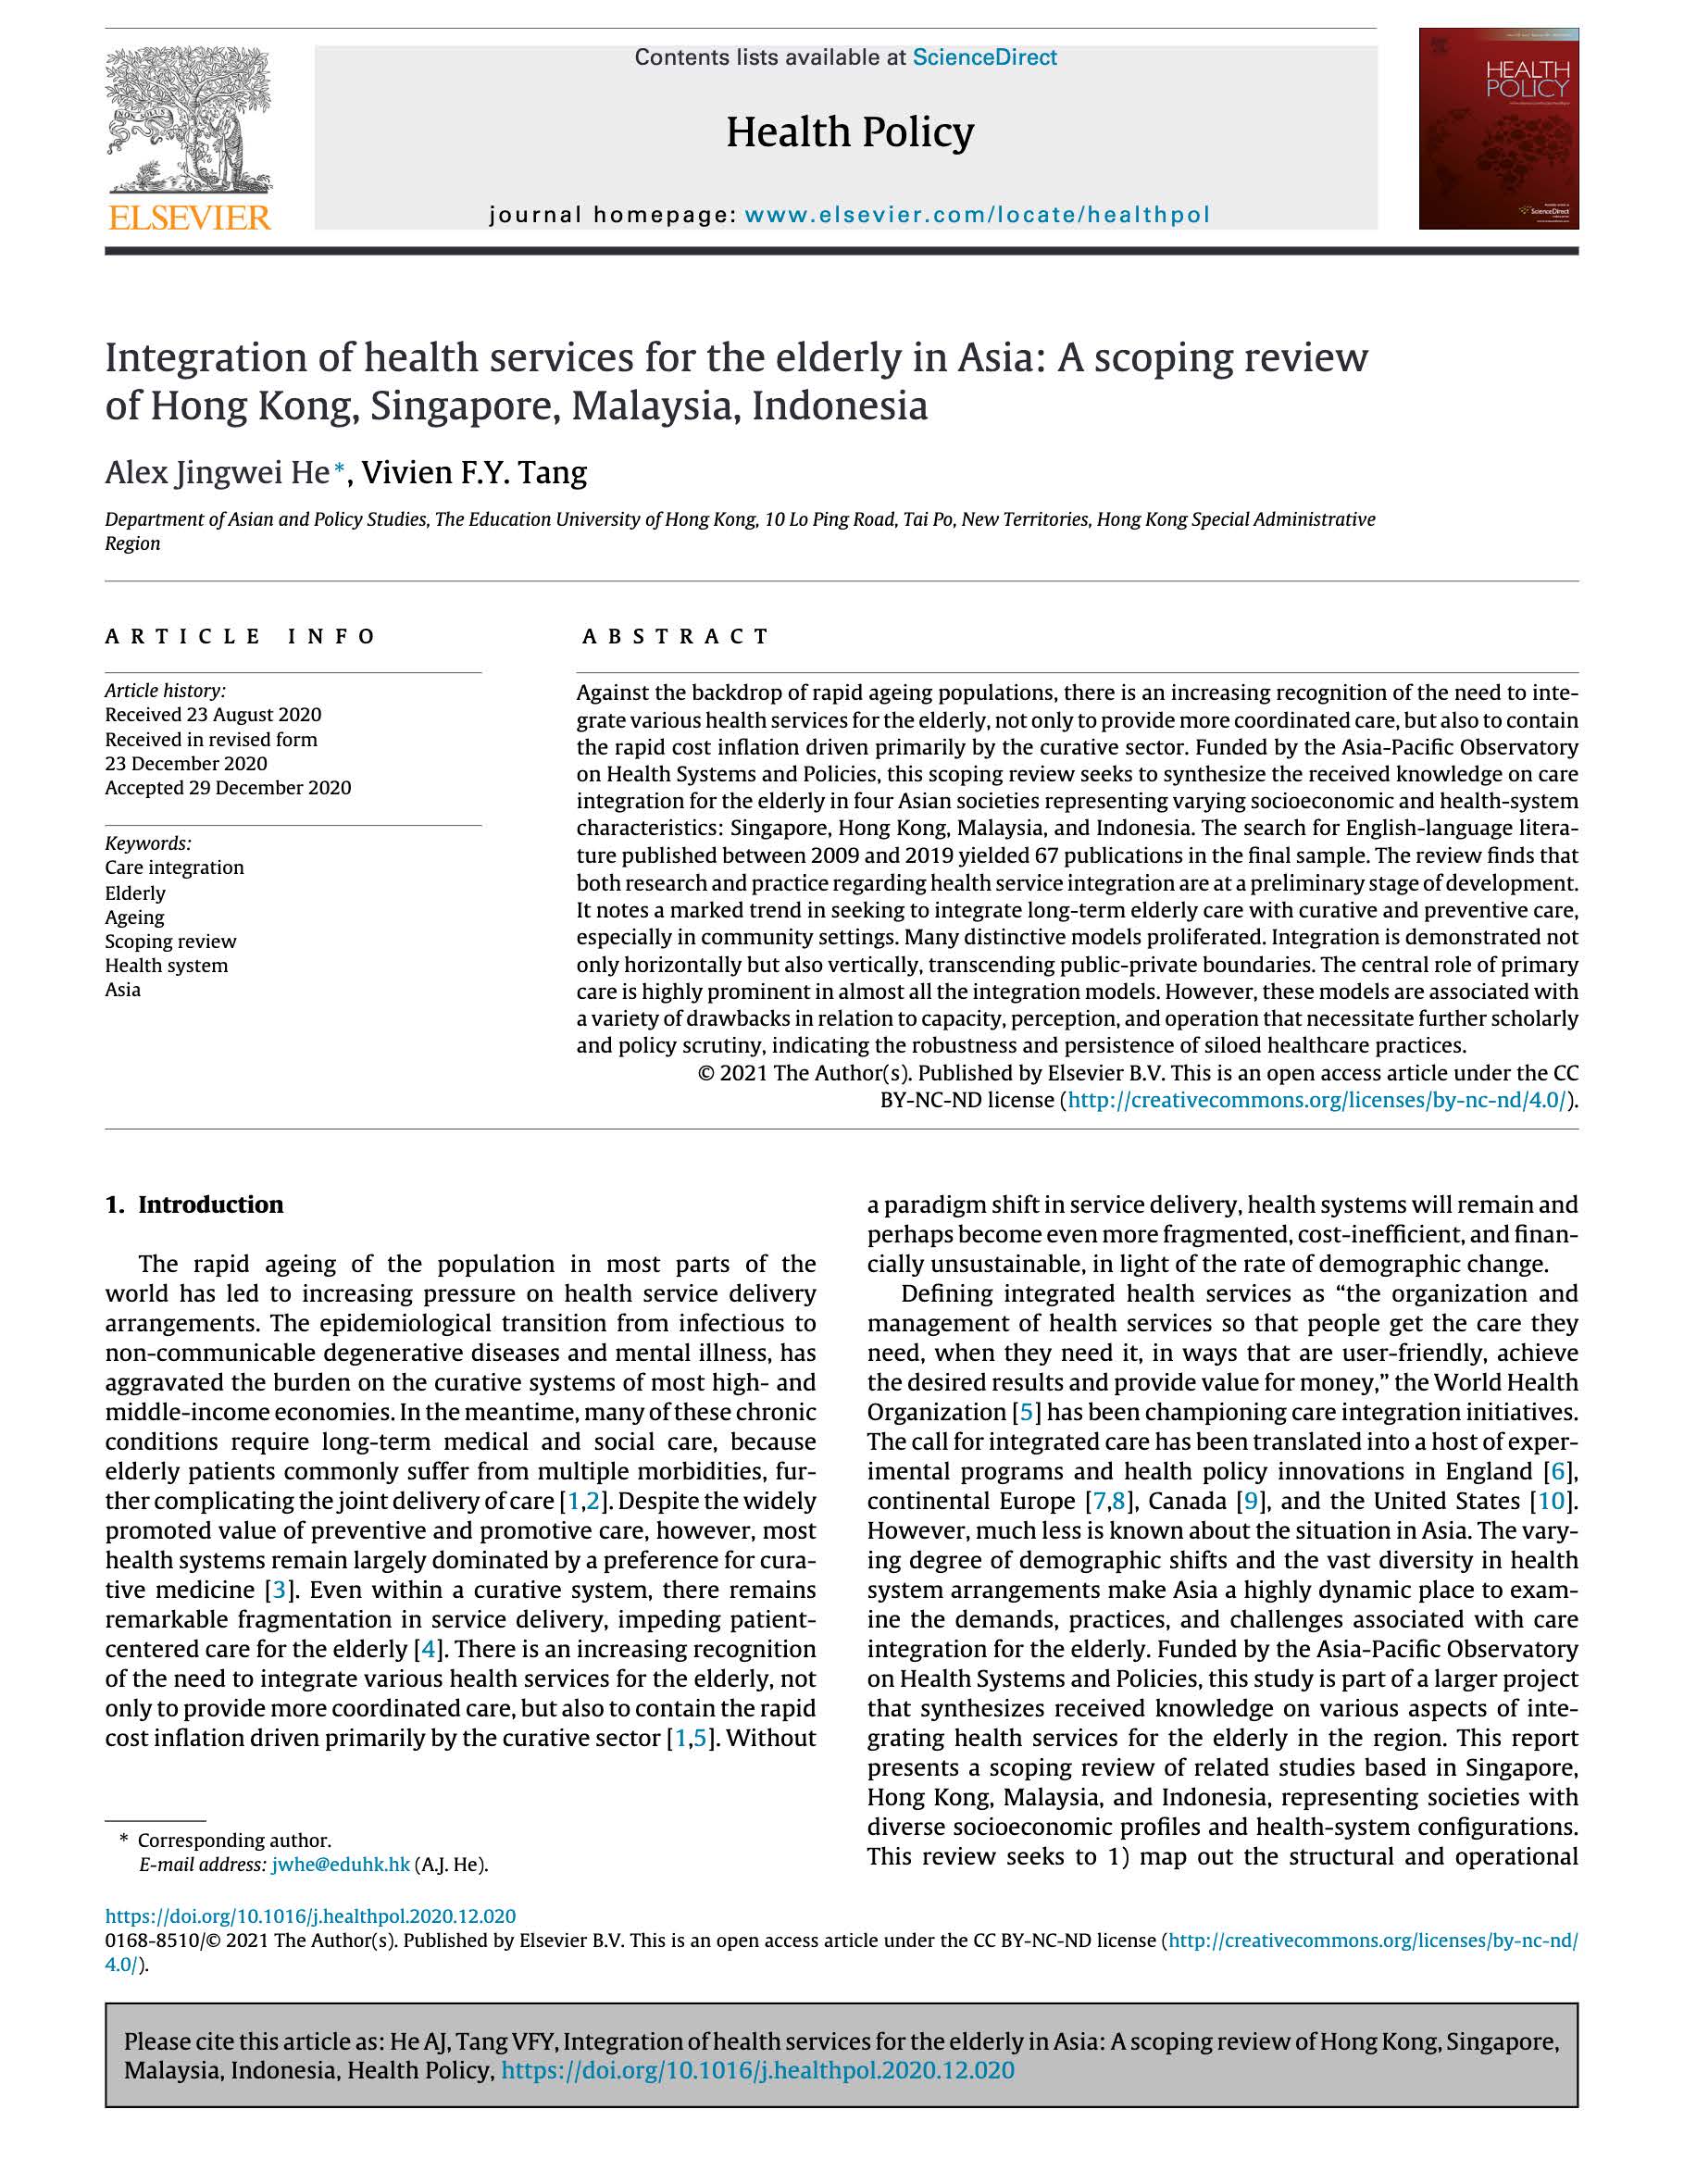 Integration-of-health-services-for-the-elderly-in-Asia-A-scoping-review-of-Hong-Kong-Singapore-Malaysia-Indonesia-Elsevier-Enhanced-Reader.jpg